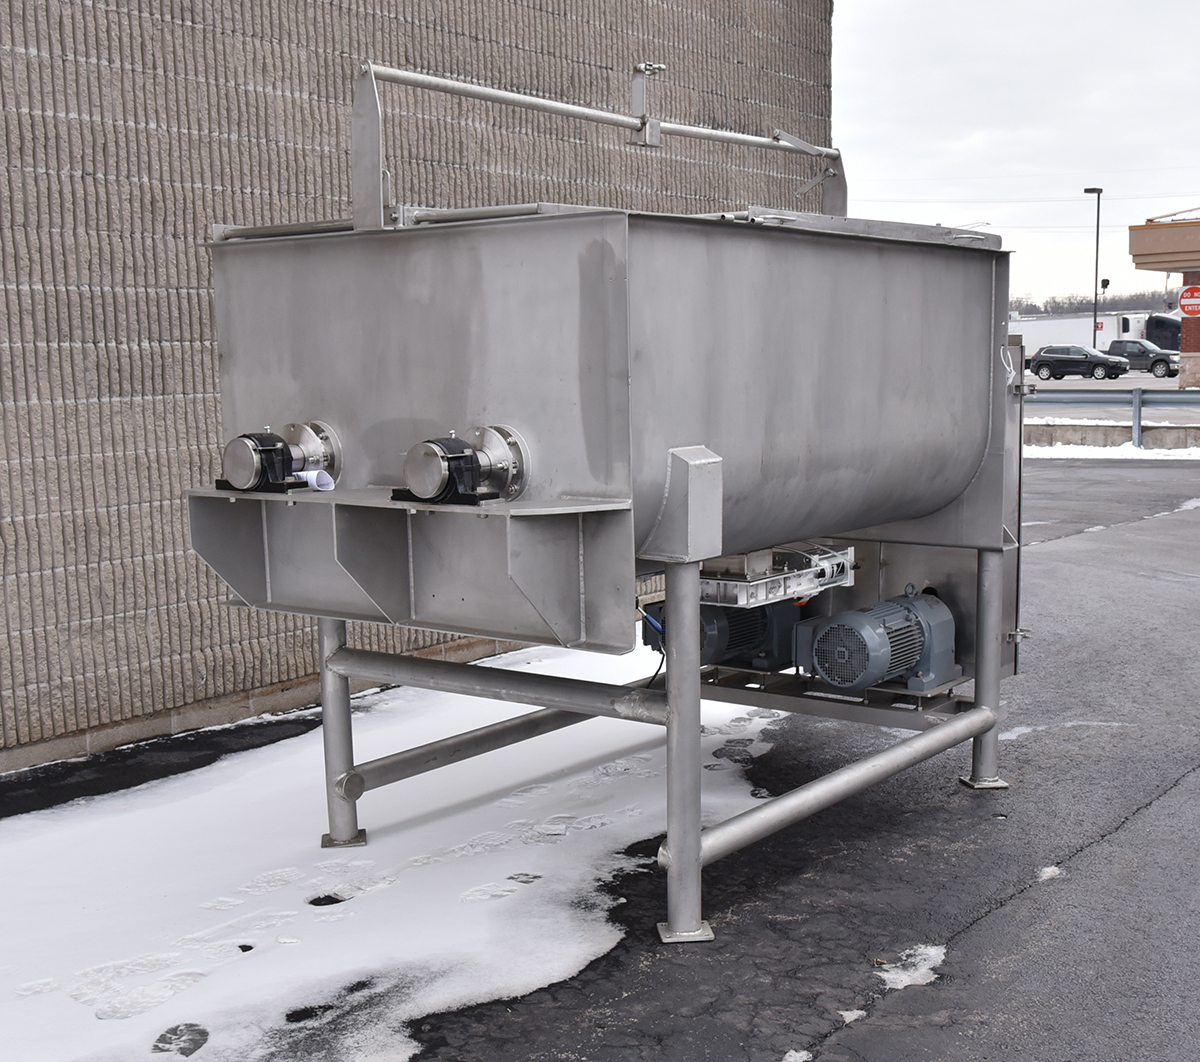 Used 60 cubic foot RIBBON MIXER, dual, slide gate discharges for particulates, powders, food grade, stainless steel, Alard item Y0850